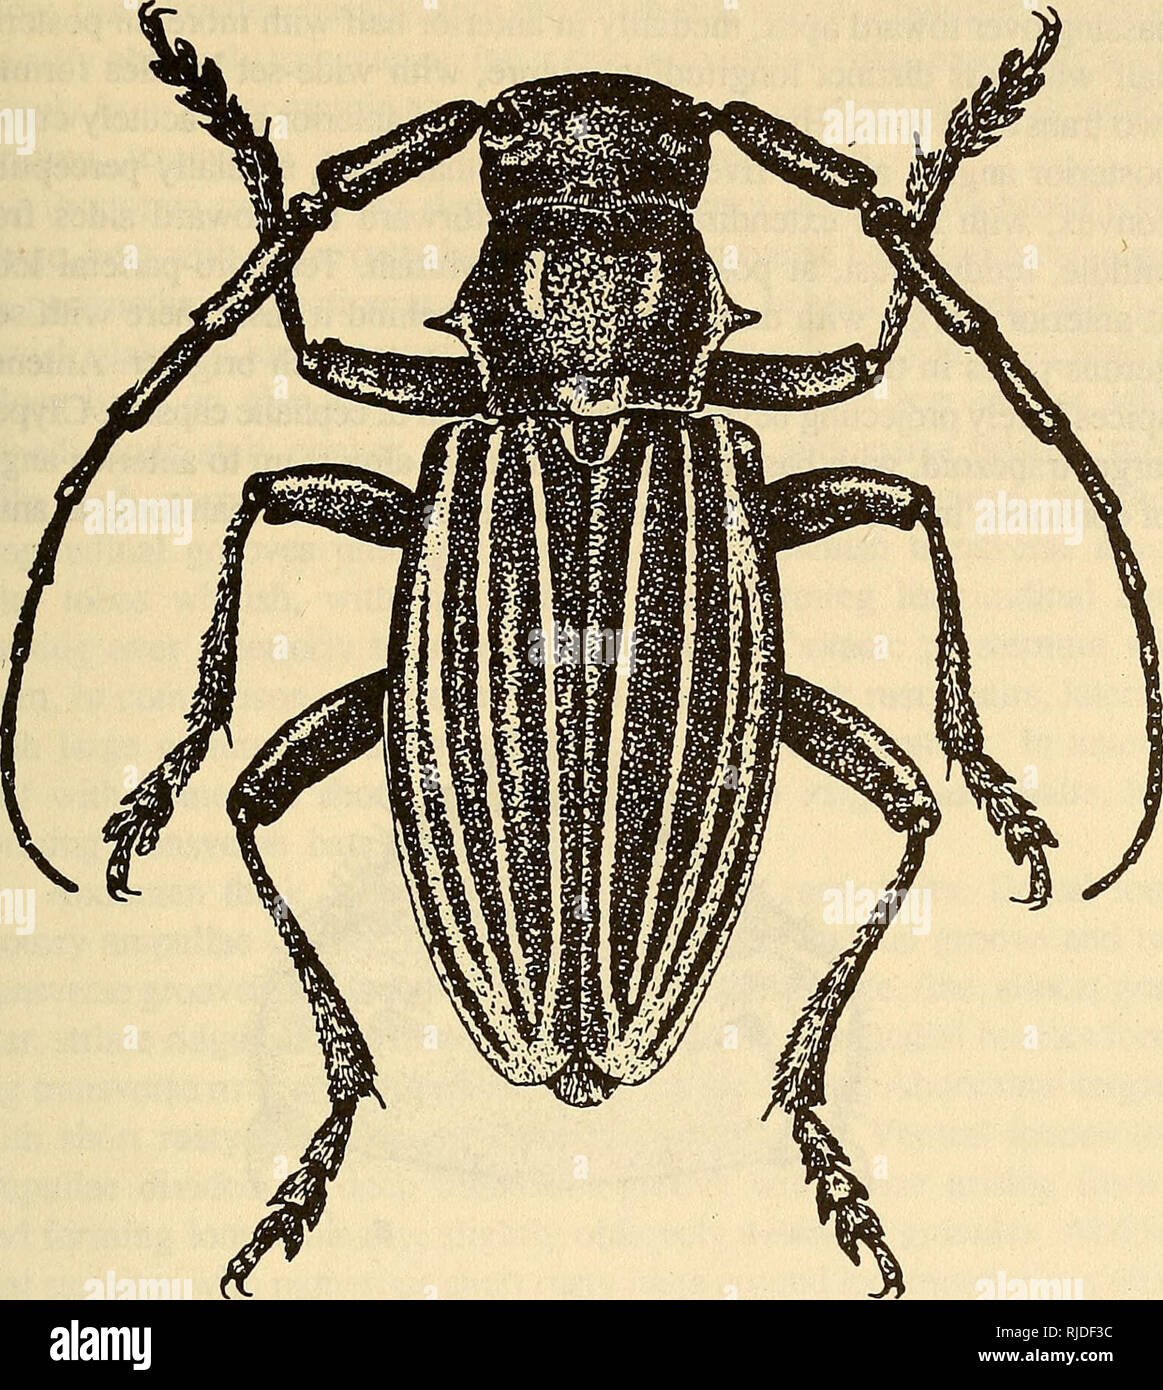 . Cerambycidae of Northern Asia. Cerambycidae; Beetles; Cerambycidae; Cerambycidae. 85. Fig. 30. Eodorcadion quinquevittatum (Hamm.). dense compact adherent white pubescence. Legs with uneven gray pub- escence. Midtibiae in distal half on outer side in males with deeper, in females with less deep notch bearing dense bristles forming brush. Body, antennae, and legs black. Body length 14-24 mm. Egg: White with brownish tinge, elongate, broadly rounded at poles. Chorion with very fine cellular sculpture. Length 3.0-4.2 mm, width 0.9-1.1 mm, weight 4-5 mg. Larva (Fig. 31): Characterized by broadly Stock Photo